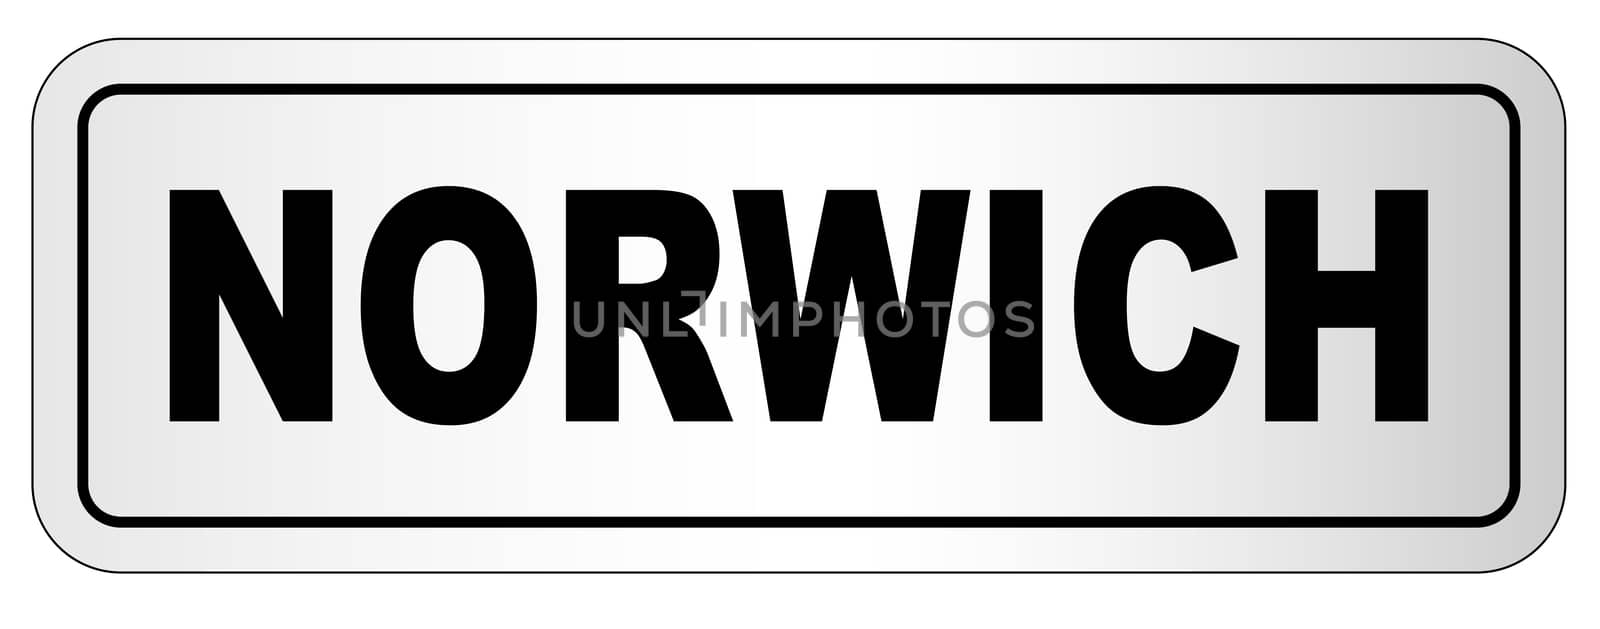 The city of Norwich nameplate on a white background